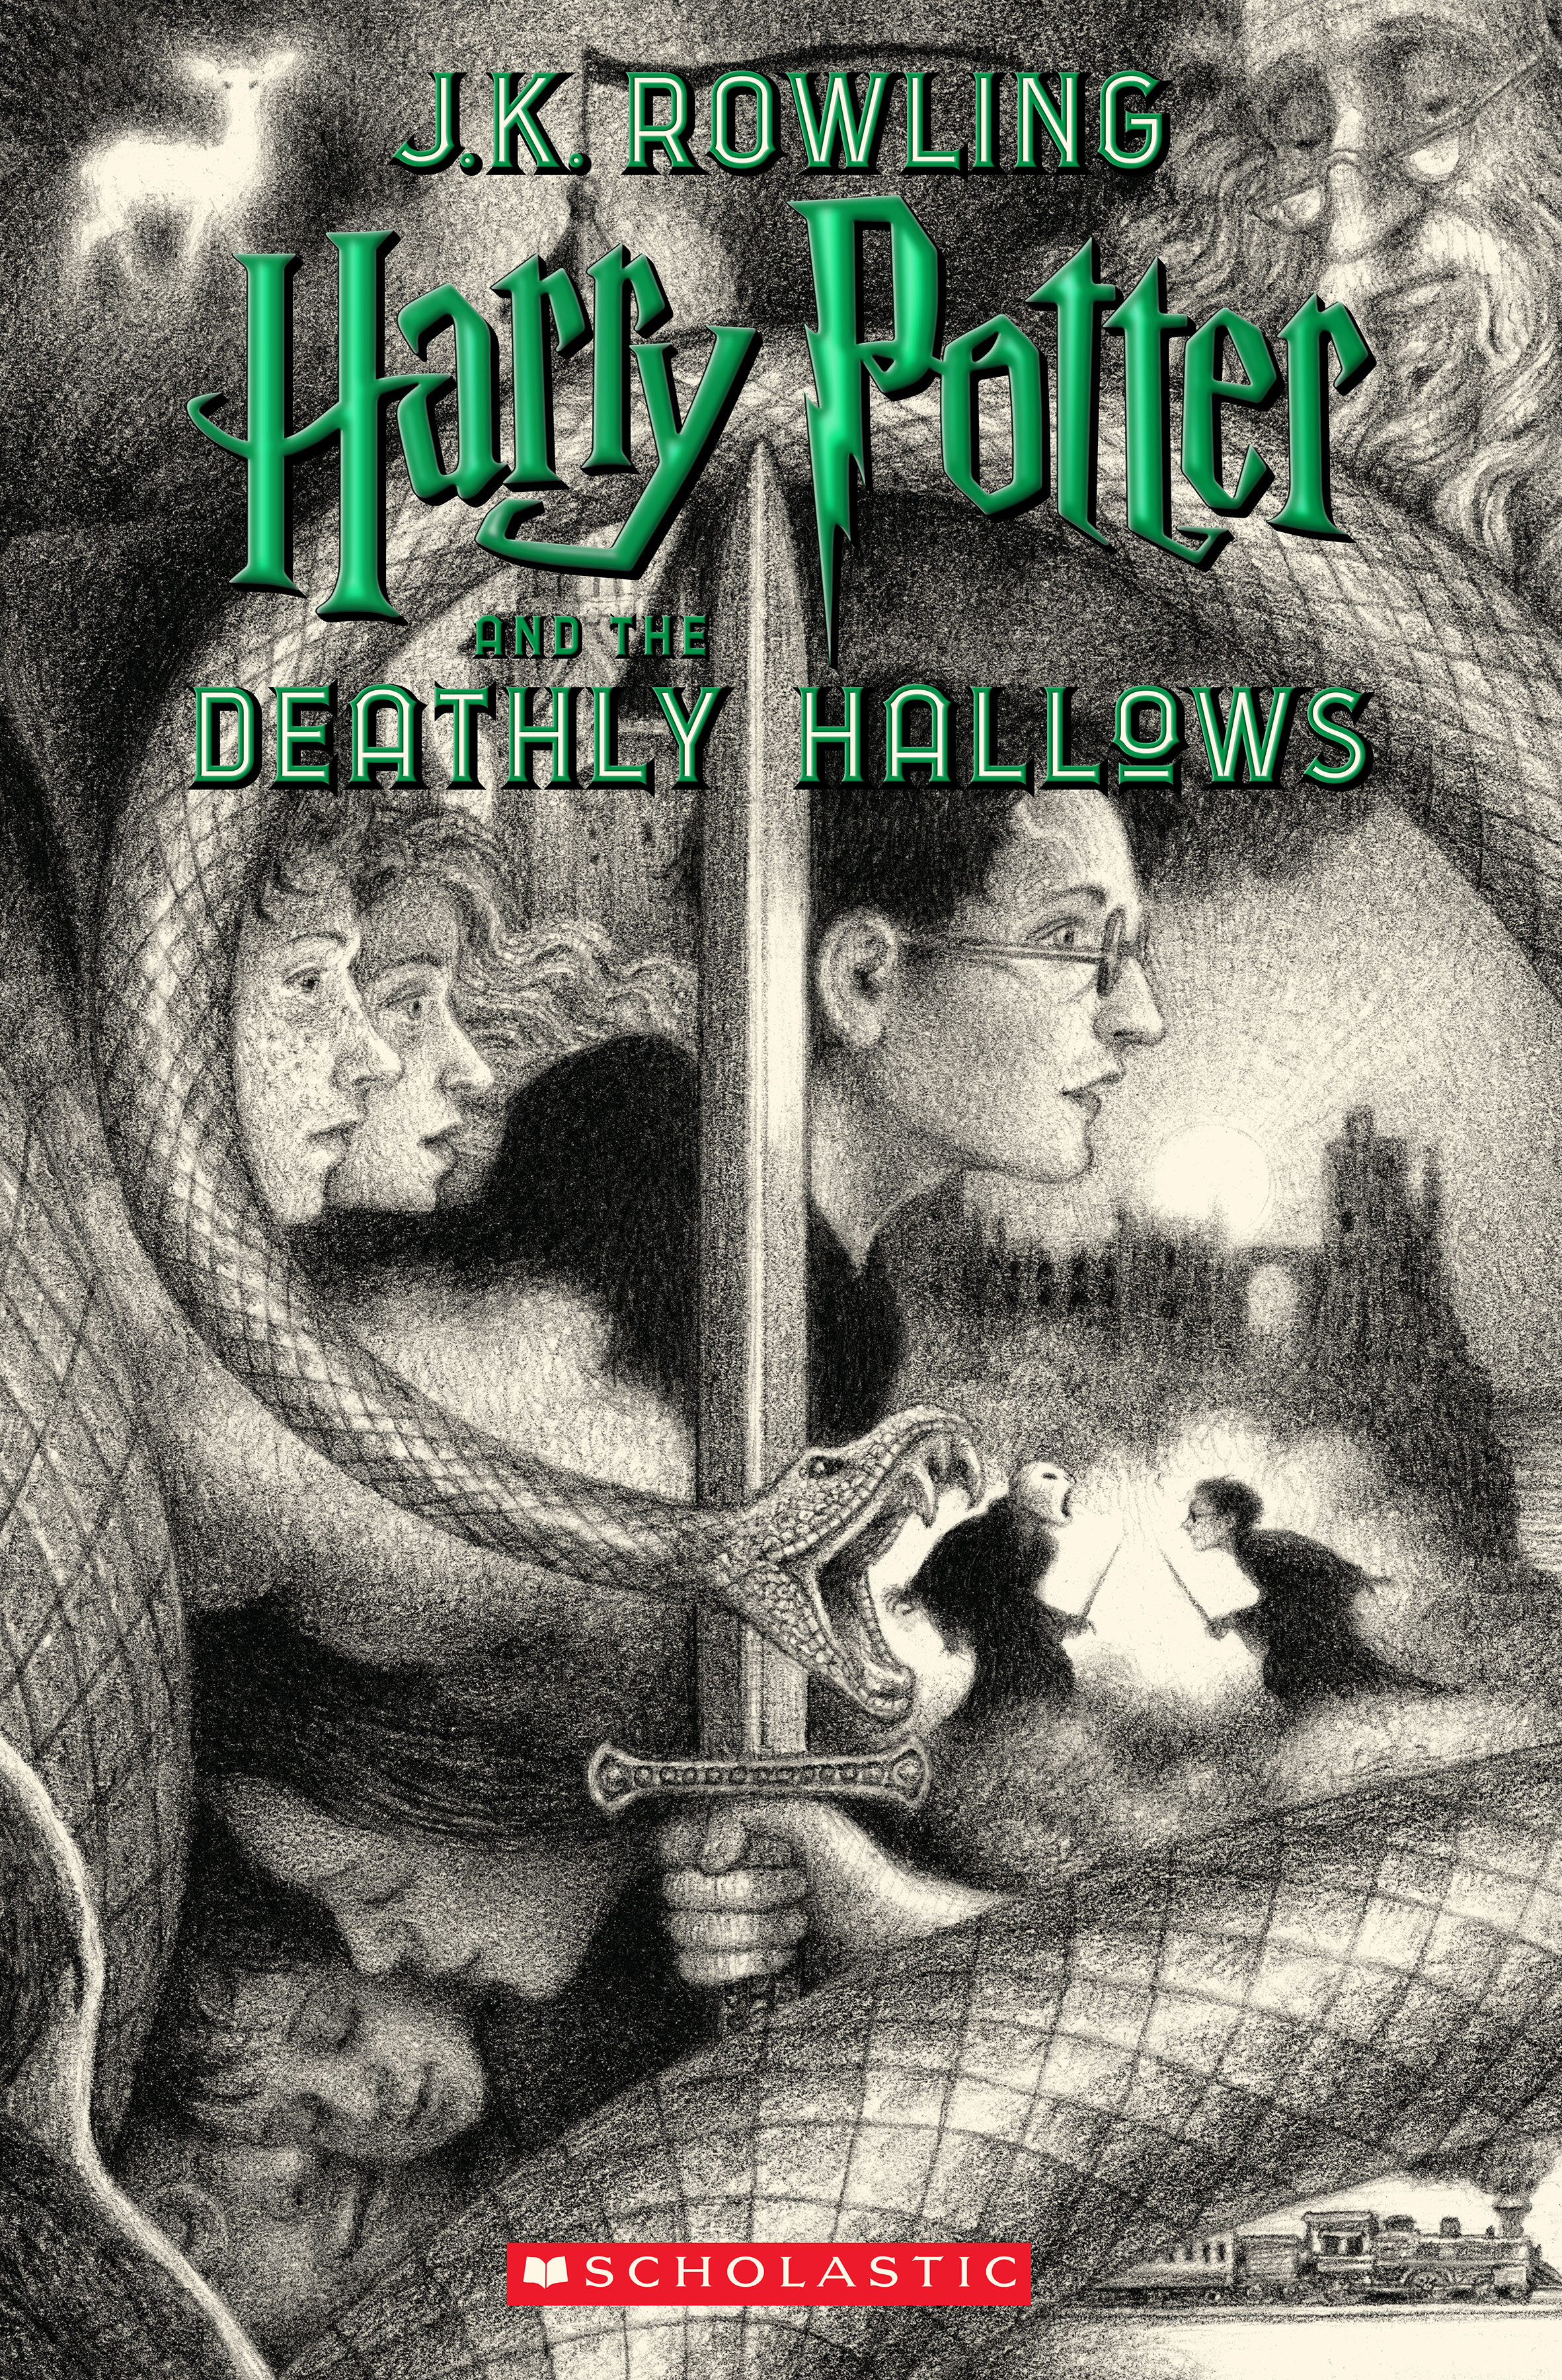 Harry Potter – 20th anniversary editions of Harry Potter and the